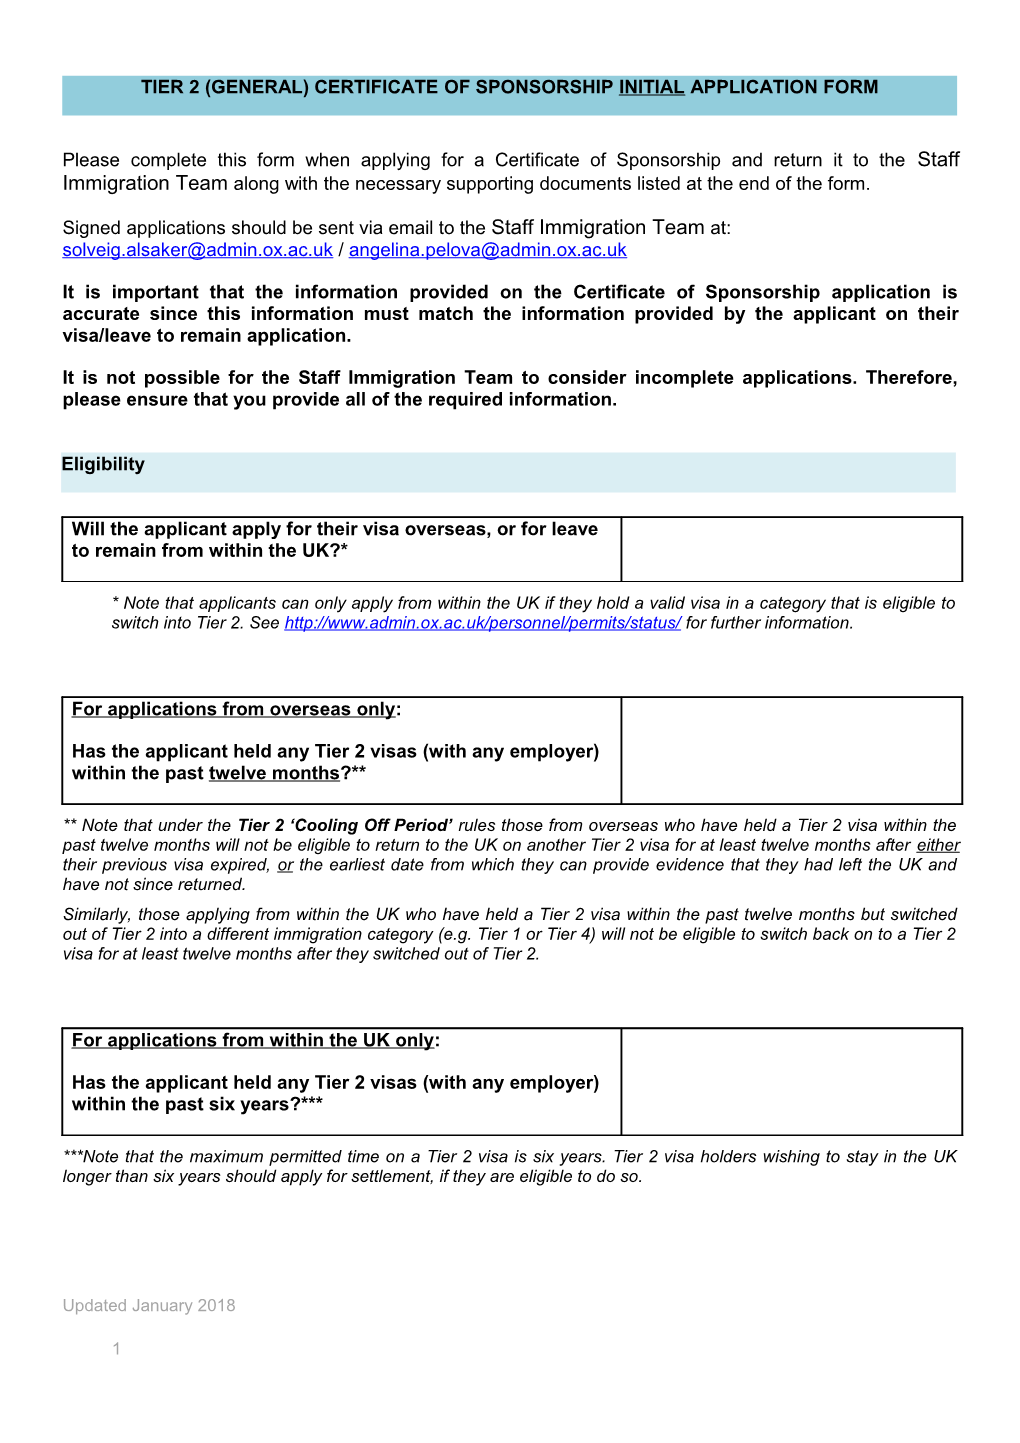 Certificate of Sponsorship Applications Checklist